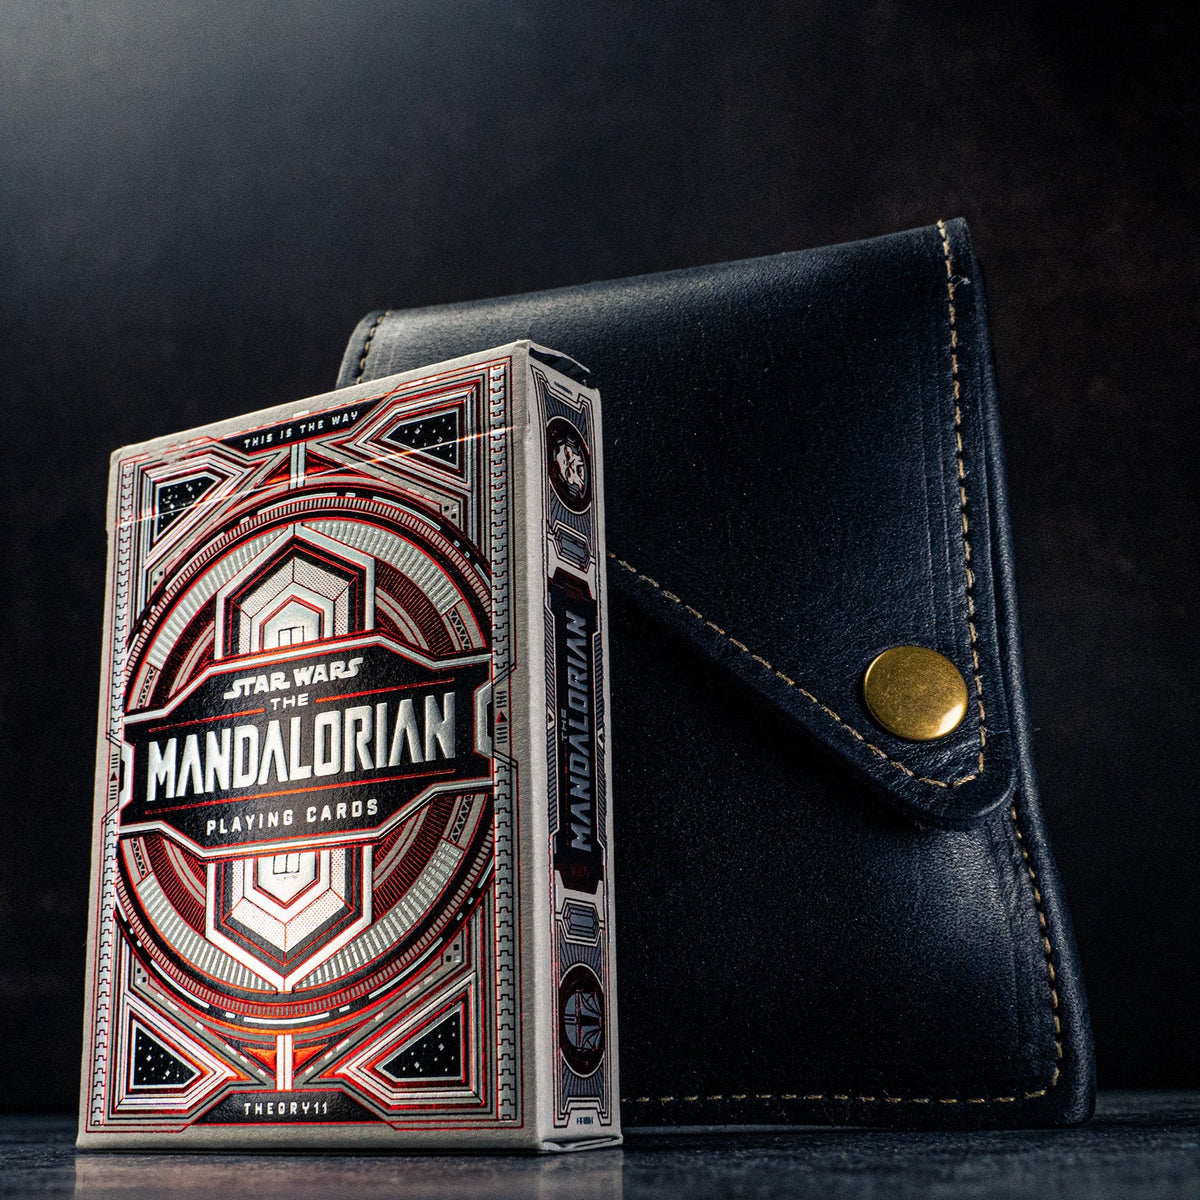 Theory 11 The Mandalorian Card Deck With Fine Leather Card Sleeve